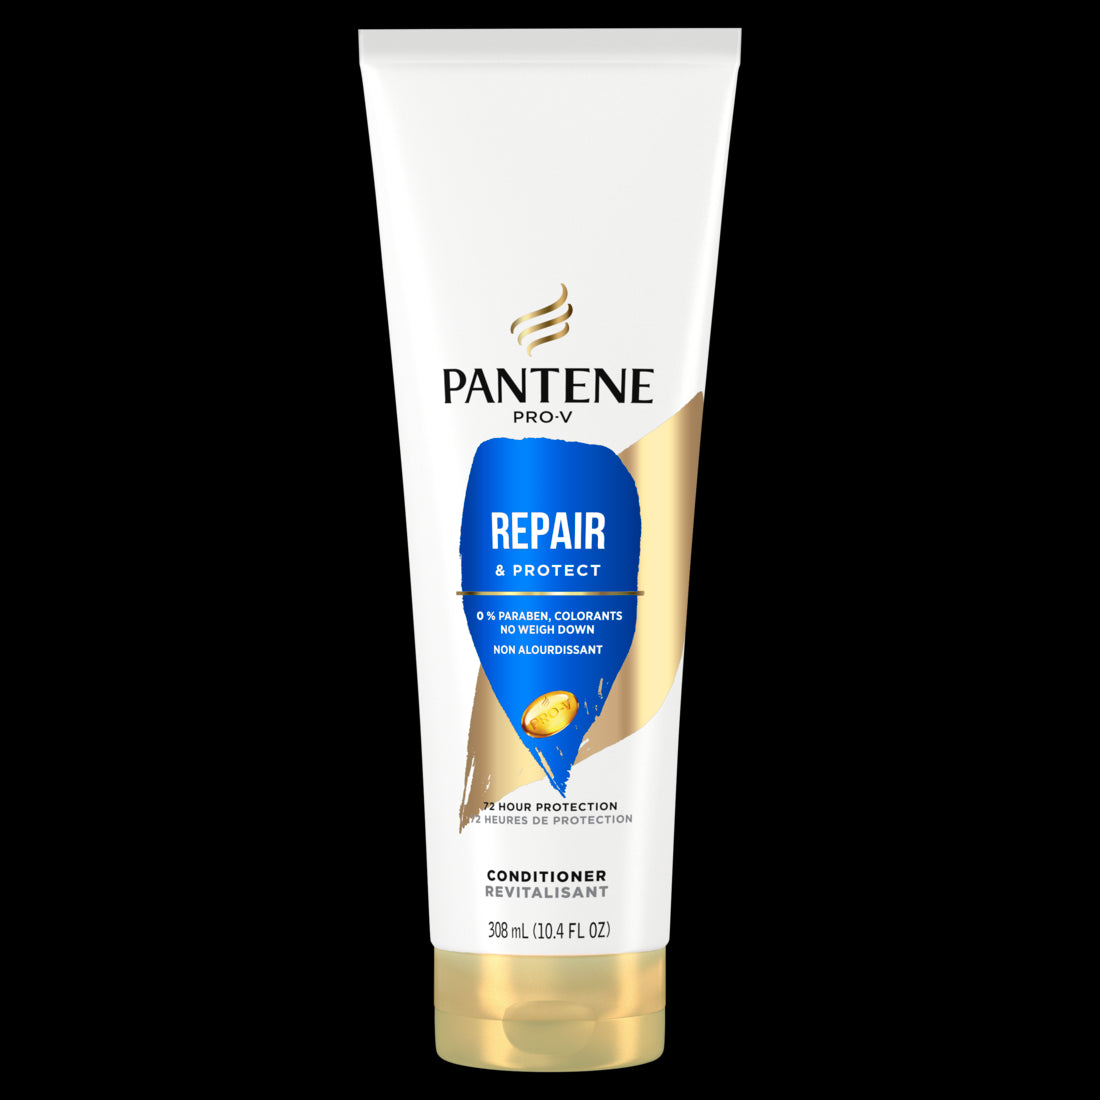 Pantene Conditioner Repair and Protect for Damaged and Bleached Hair Detangles Hair Safe for Color Treated Hair - 10.4oz/12pk